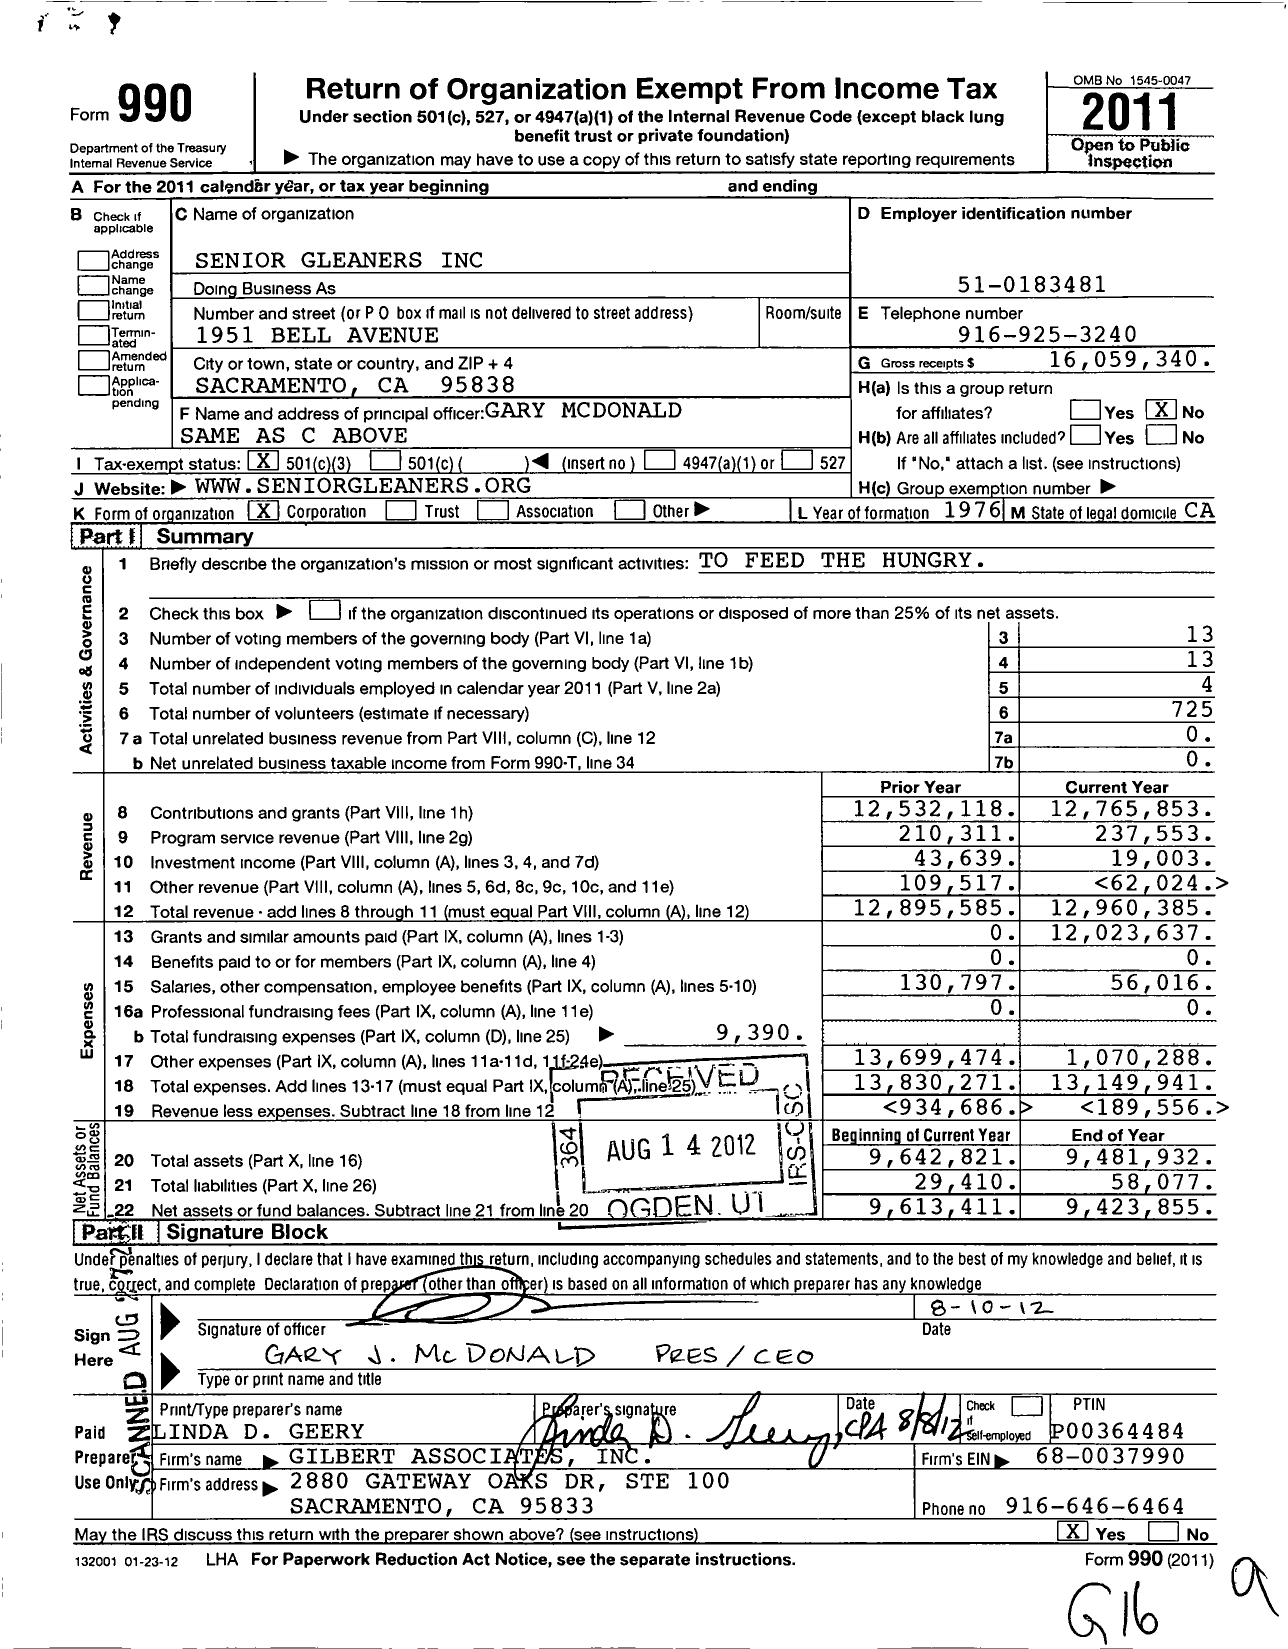 Image of first page of 2011 Form 990 for Senior Gleaners